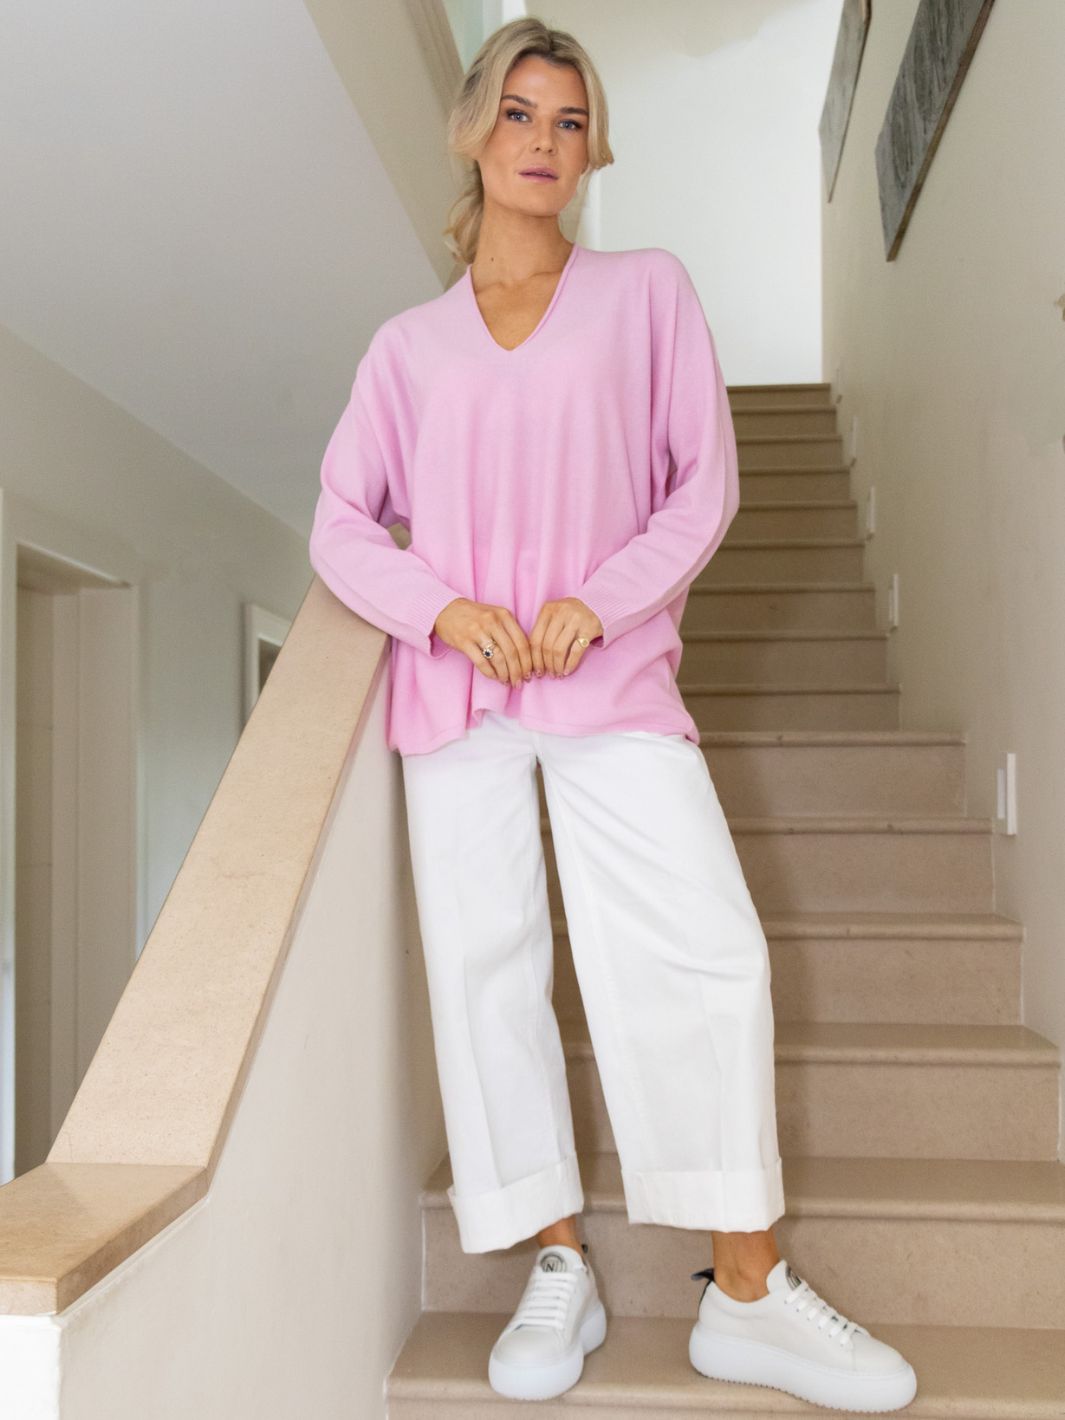 Cashmere by Kate Knitwear One Size Cashmere Oversize V-Neck Sweater in Petal Pink